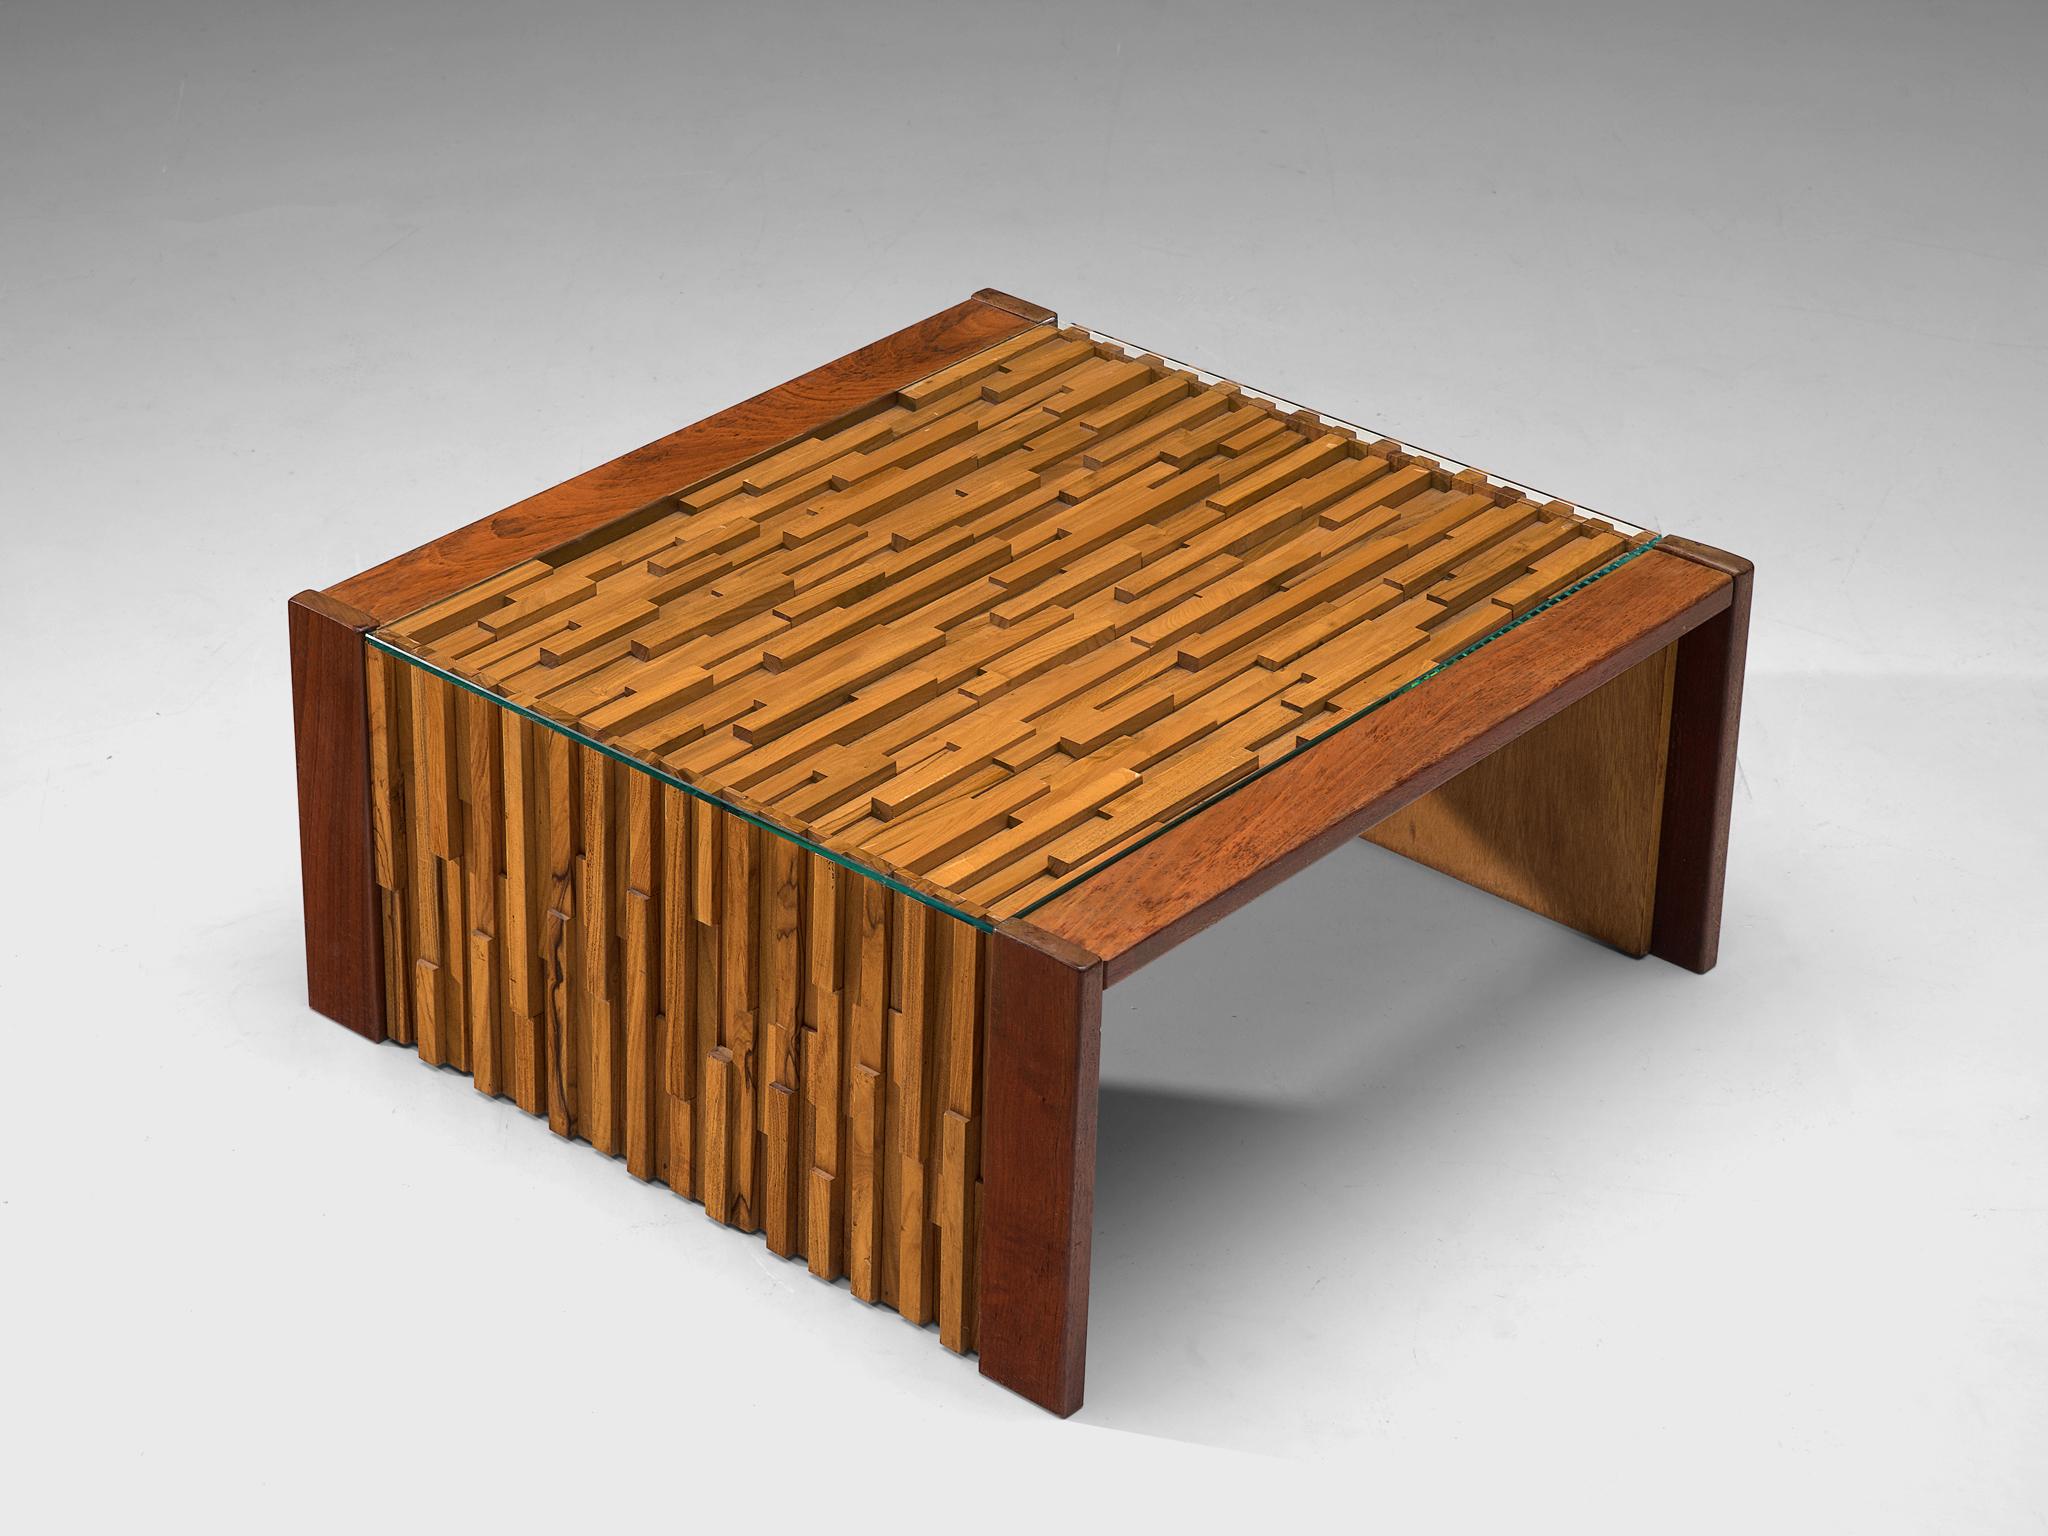 Percival Lafer, coffee table, wood, mahogany, glass, Brazil, 1970s

Amazing cocktail table by Brazilian designer Percival Lafer. Highly sculptural design that is build up with pieces of wood and mahogany. All the pieces have different dimensions,